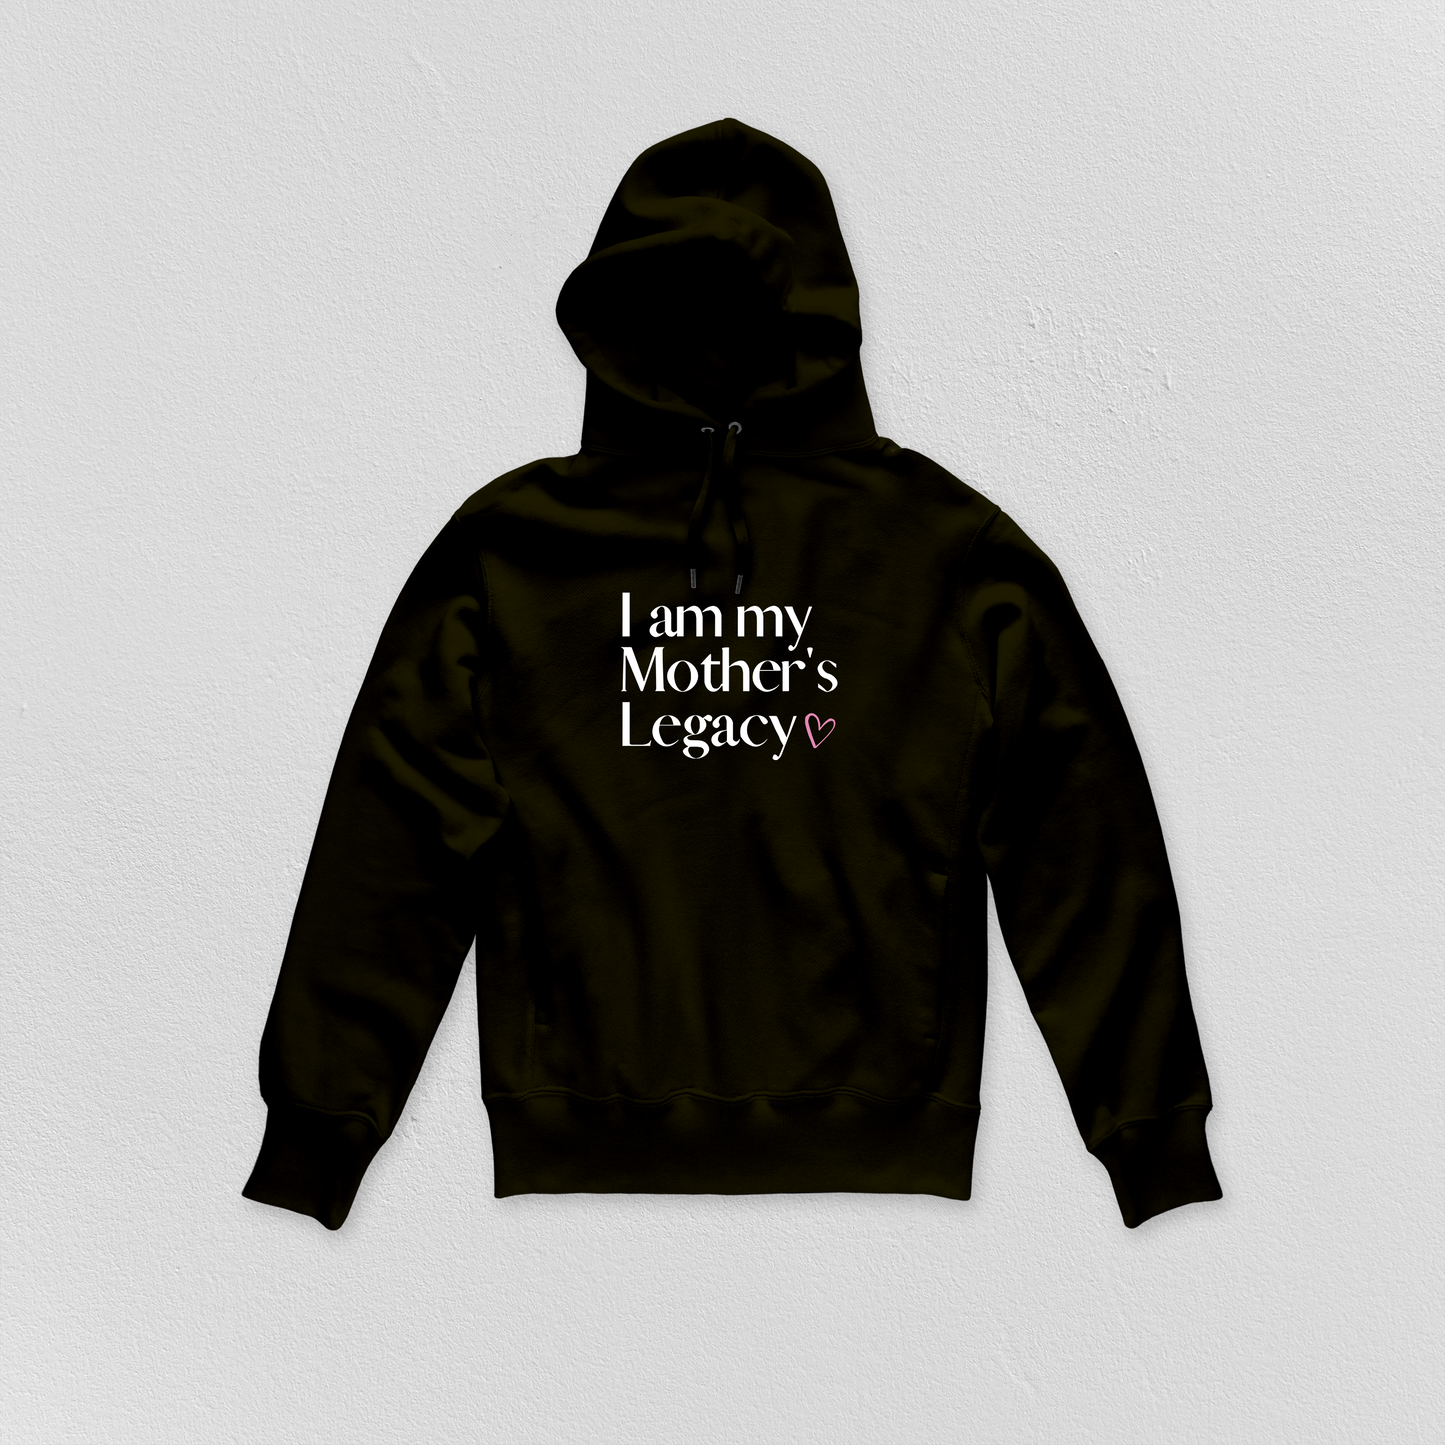 I am my Mother’s Legacy - Hoodie - Unisex - ADULT & YOUTH